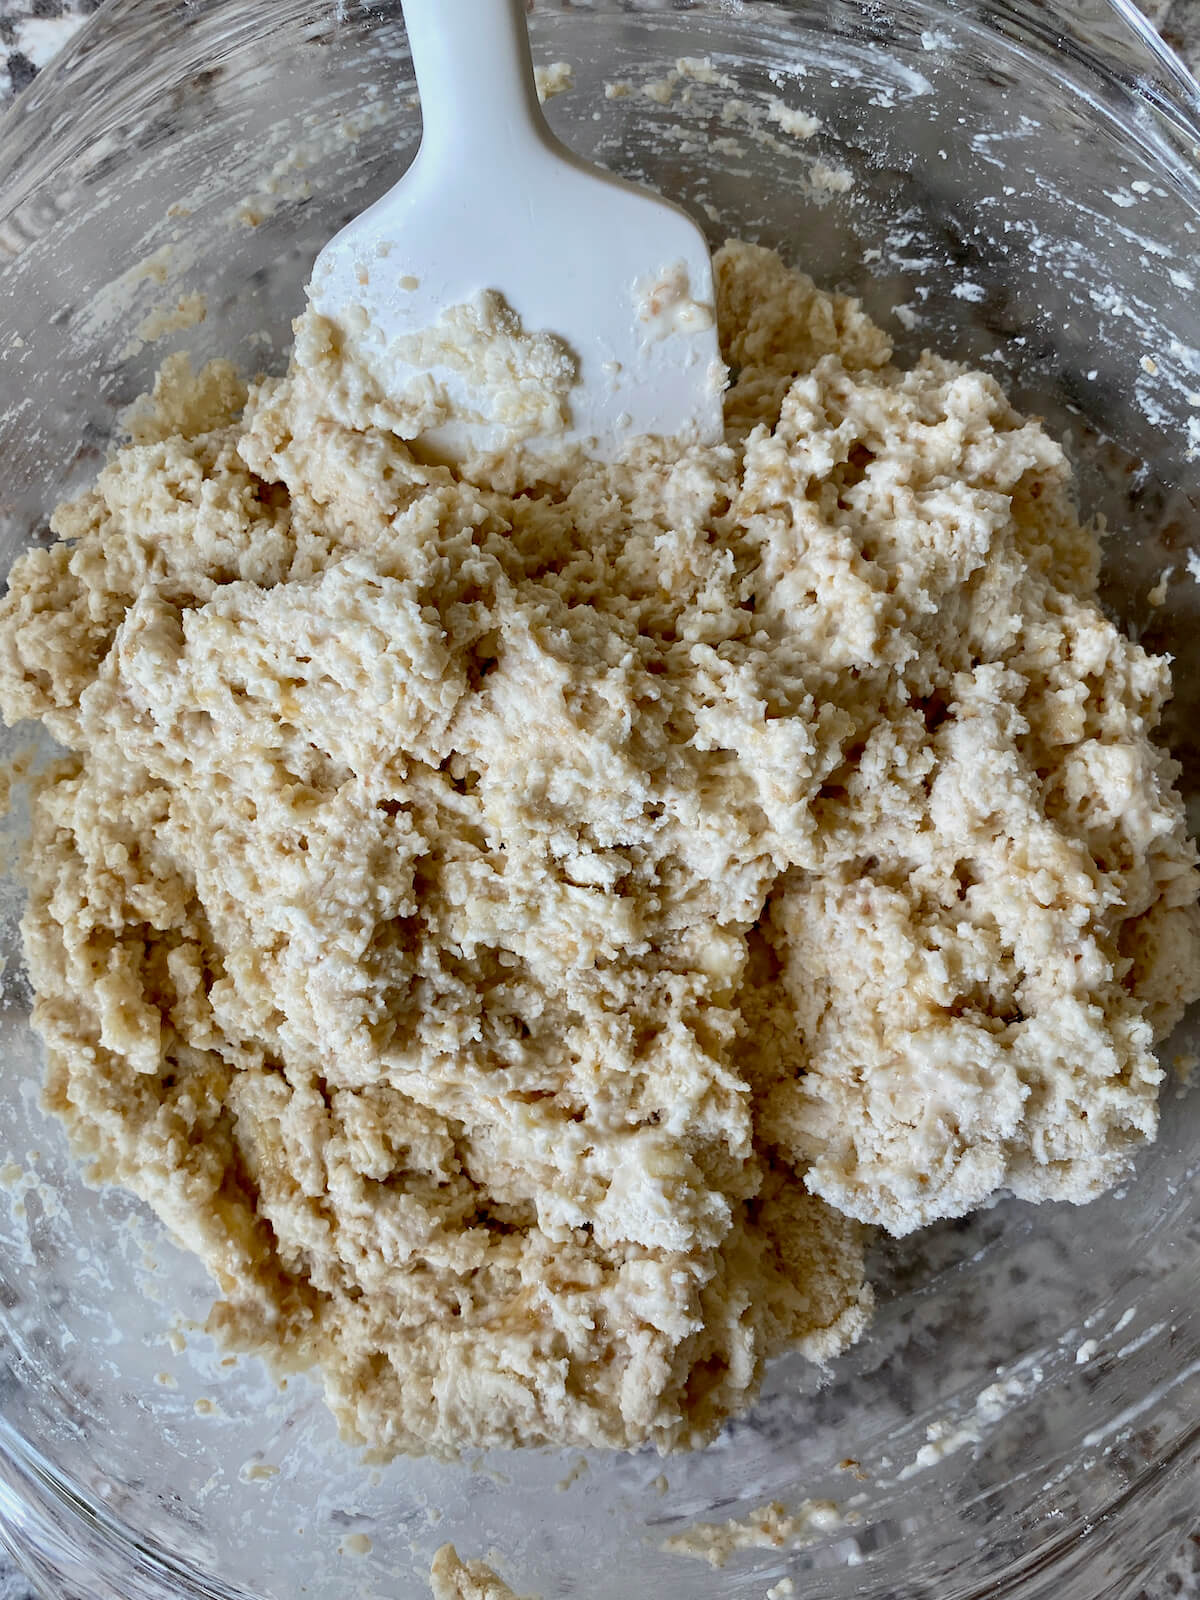 The dough roughly mixed with a rubber spatula in a glass mixing bowl.